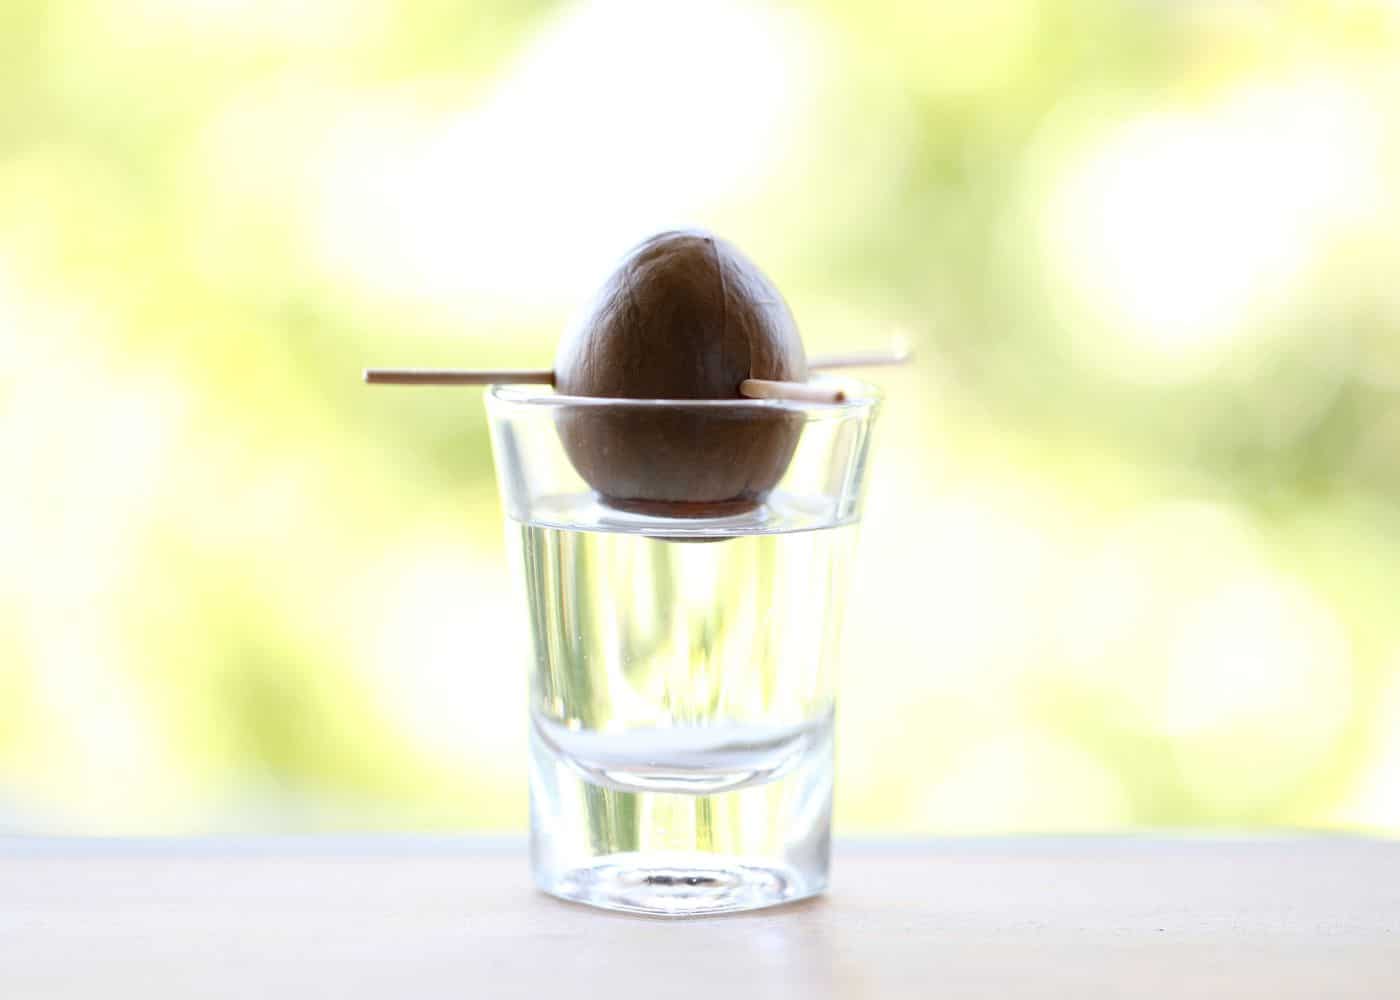 Sprouting an avocado seed in water